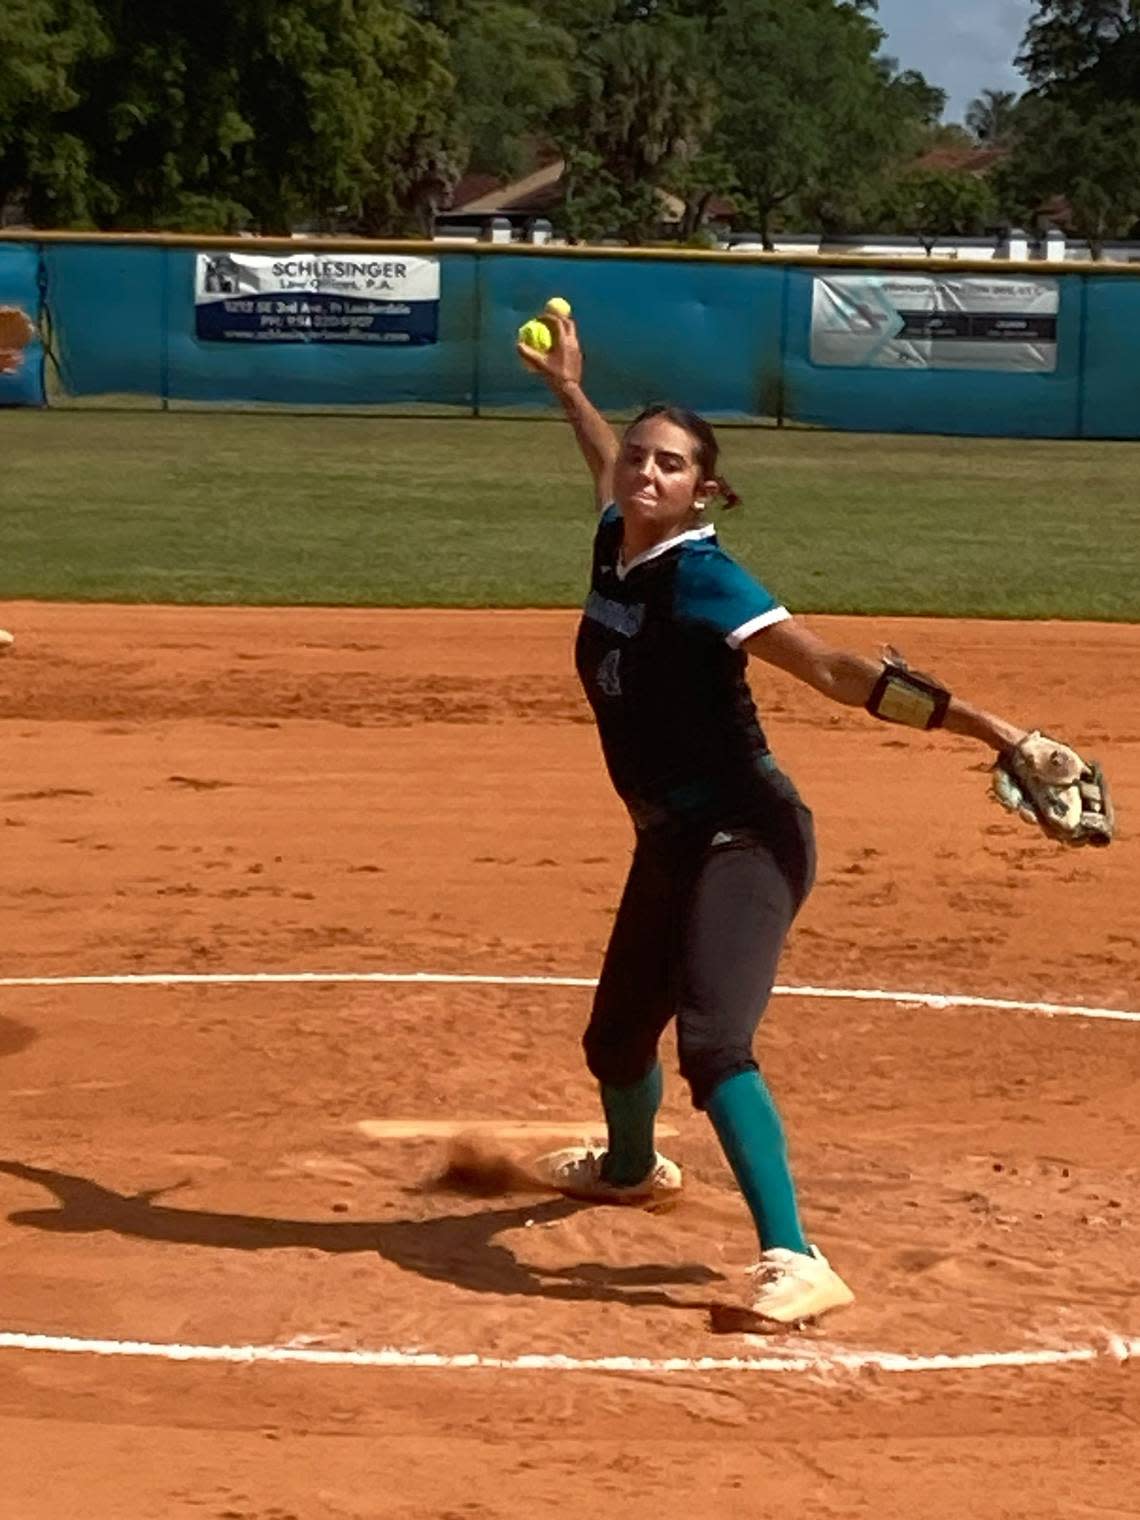 Coral Reef pitcher Aubrey Alonso allowed just one baserunner in four innings during her start Thursday. The Barracudas won 17-0 to secure the GMAC championship.